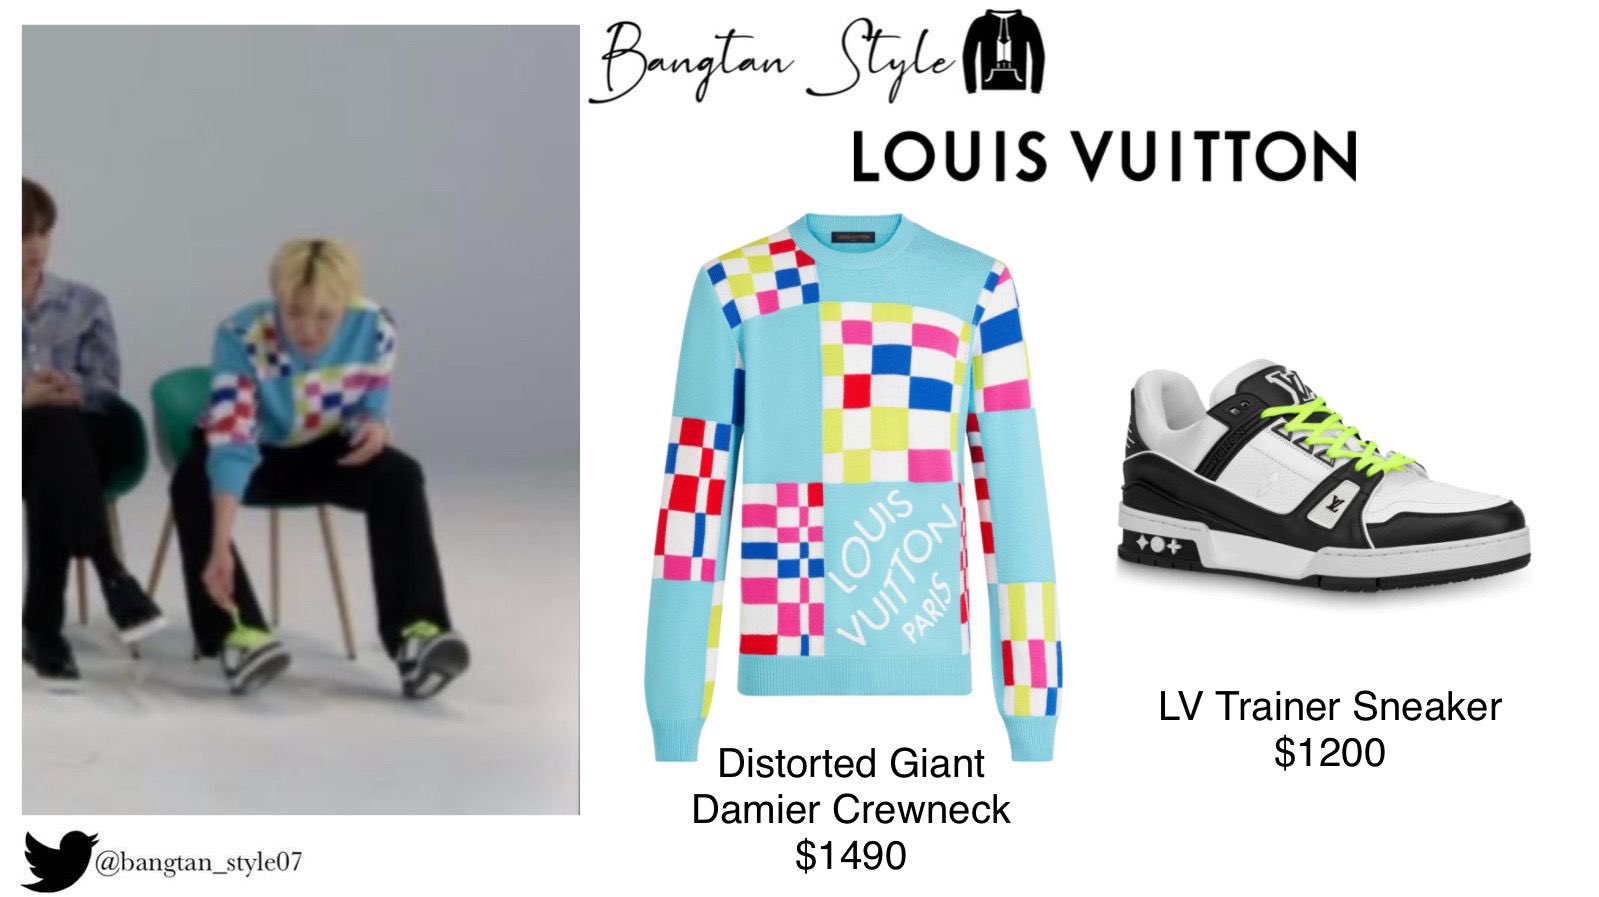 Bangtan Style⁷ (slow) on X: BTS at THE TONIGHT SHOW D1 Jungkook wears LOUIS  VUITTON sneakers, Y/Project Belt & CHANEL Brooch. #JUNGKOOK  #BTSonFallon_D1 @BTS_twt  / X